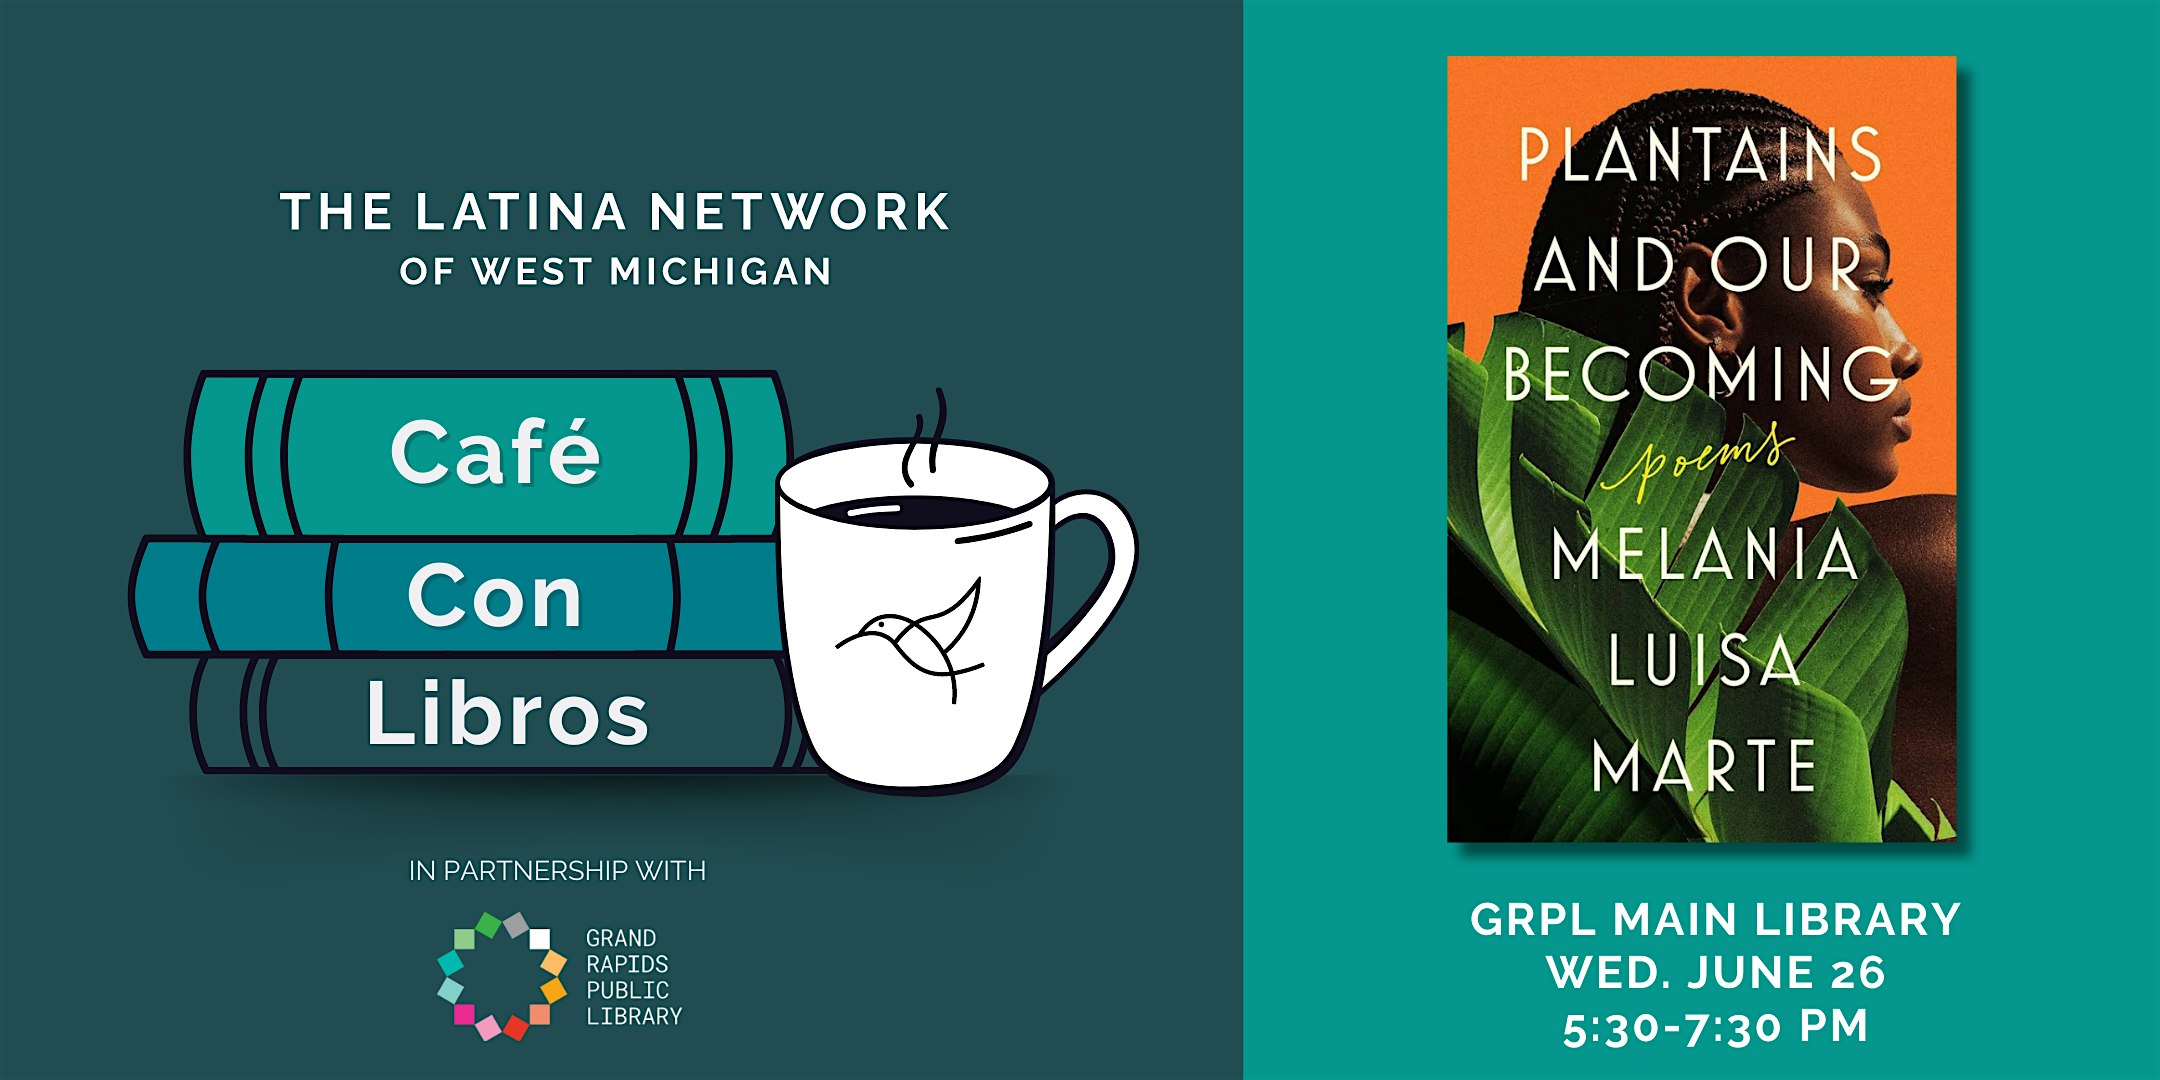 Caf\u00e9 Con Libros Book Club: Plantains and Our Becoming